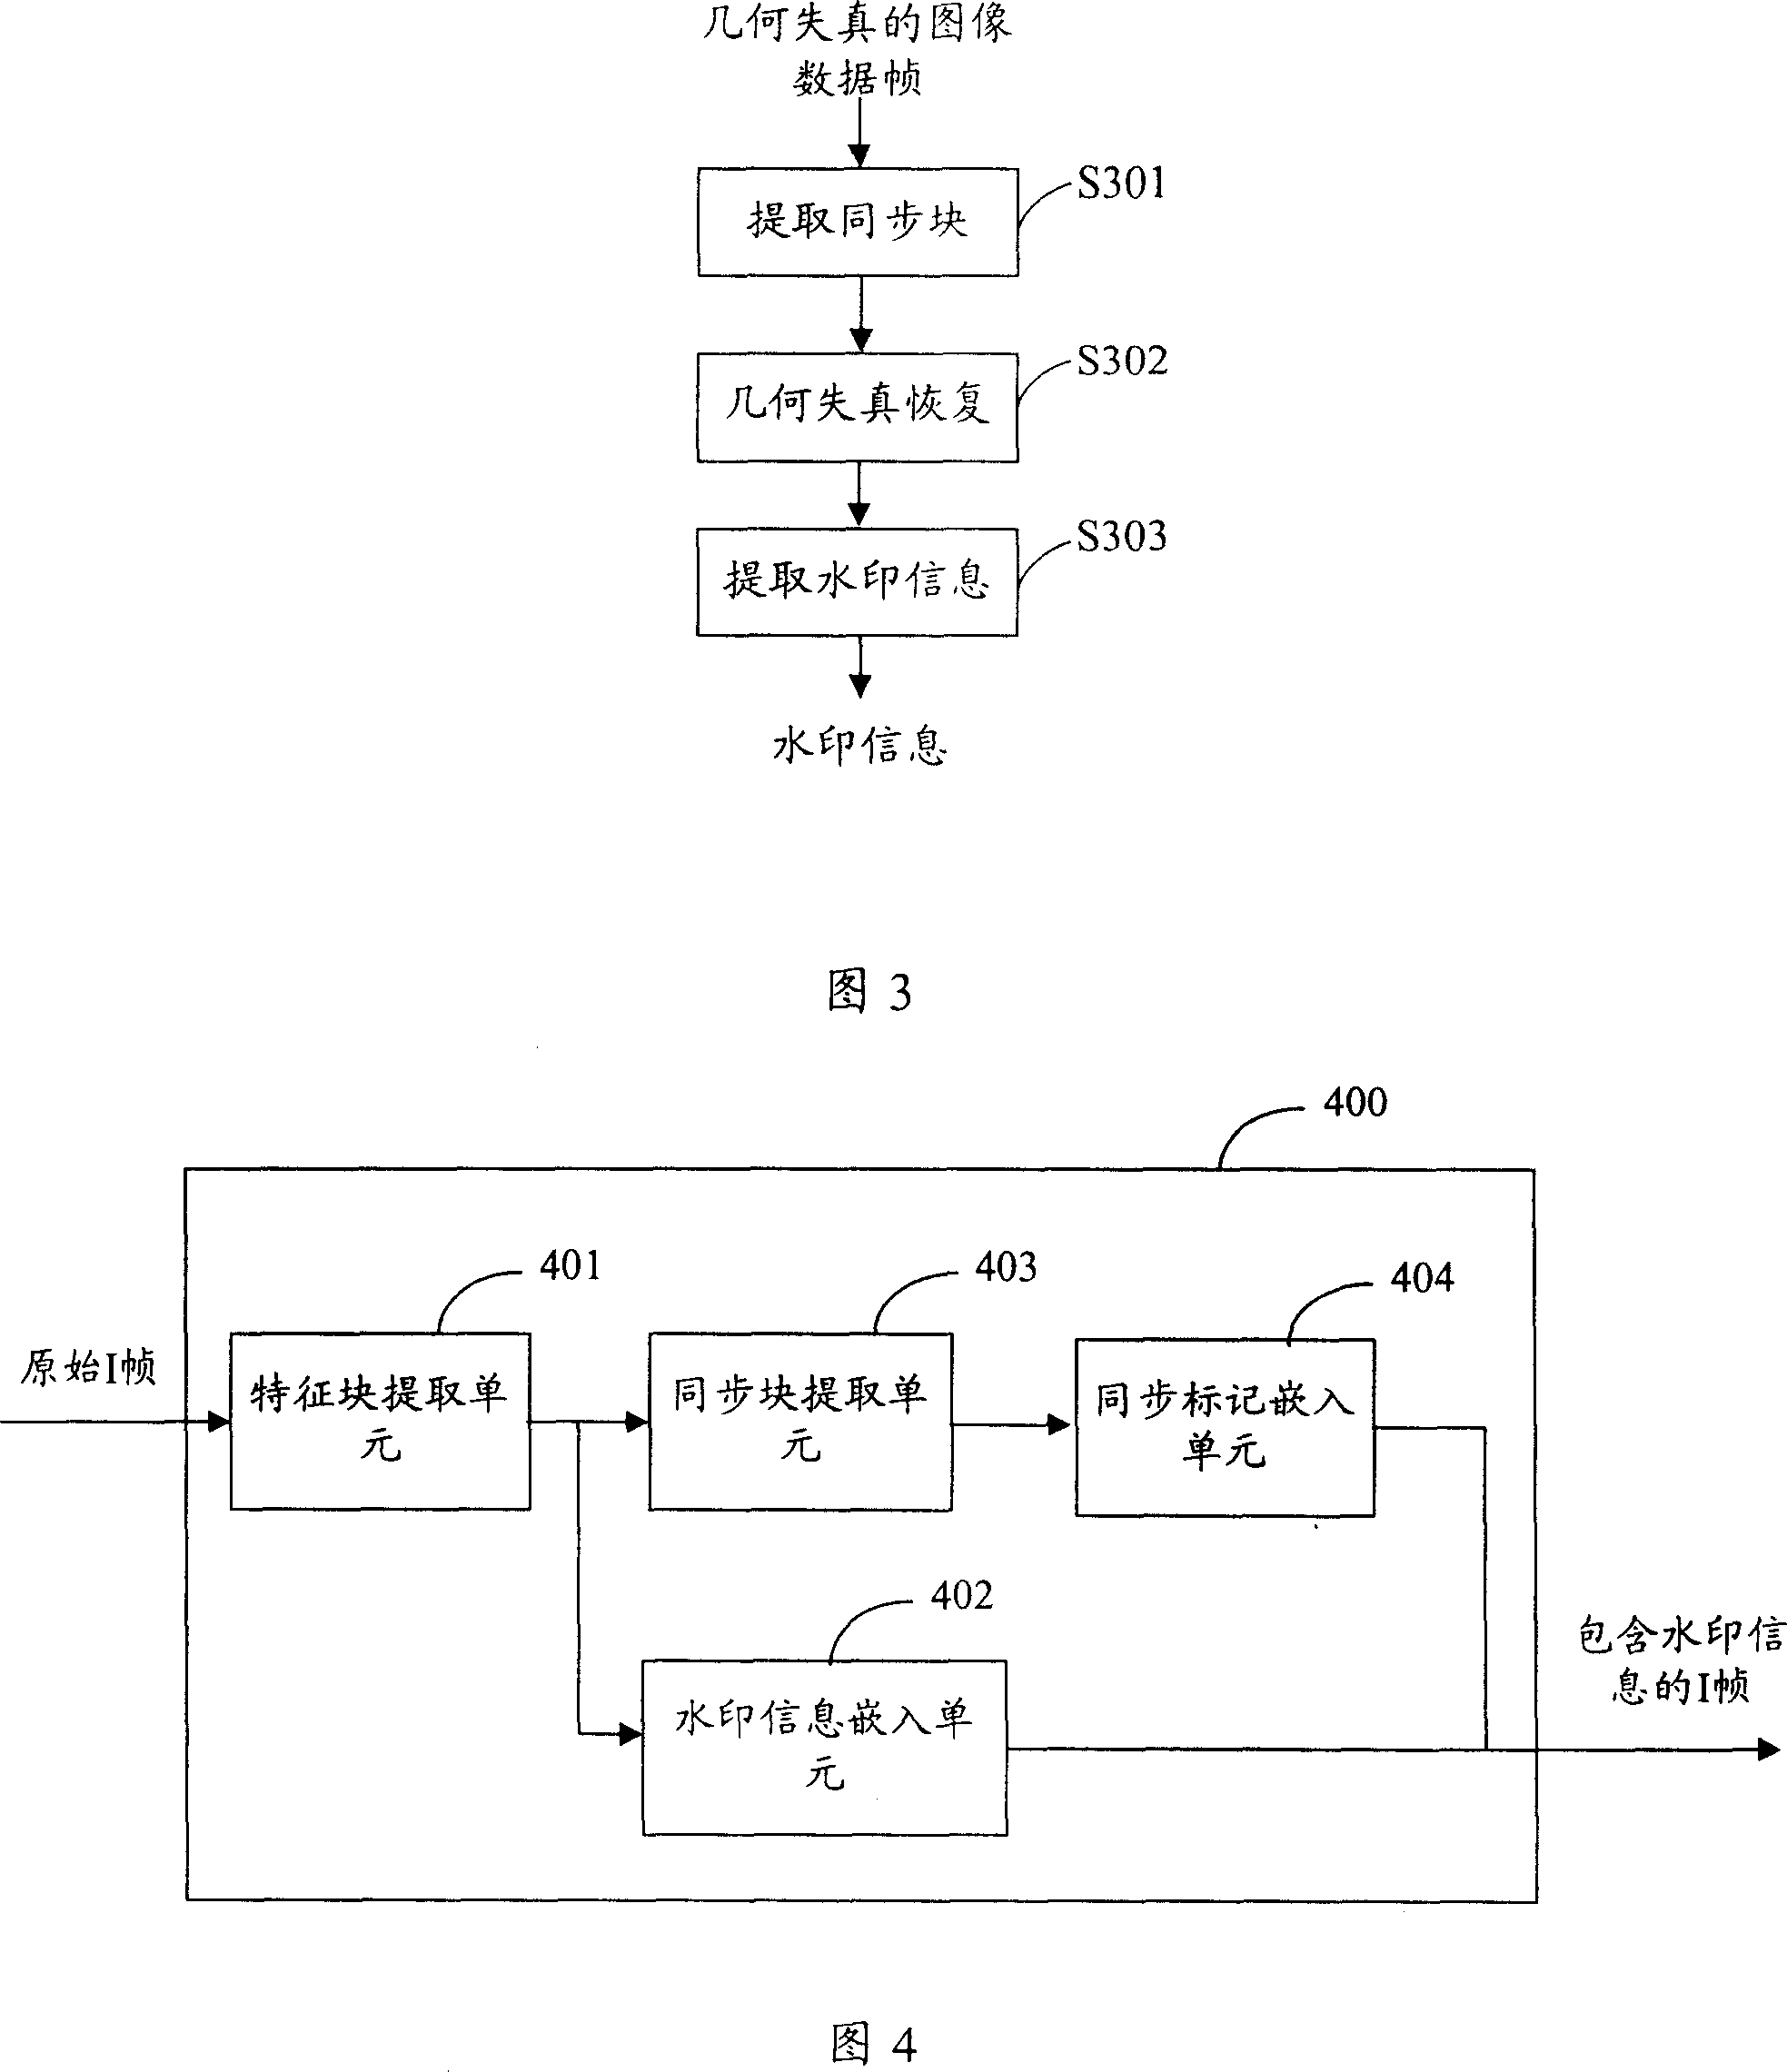 Embedding and detecting method and system for image data watermark information